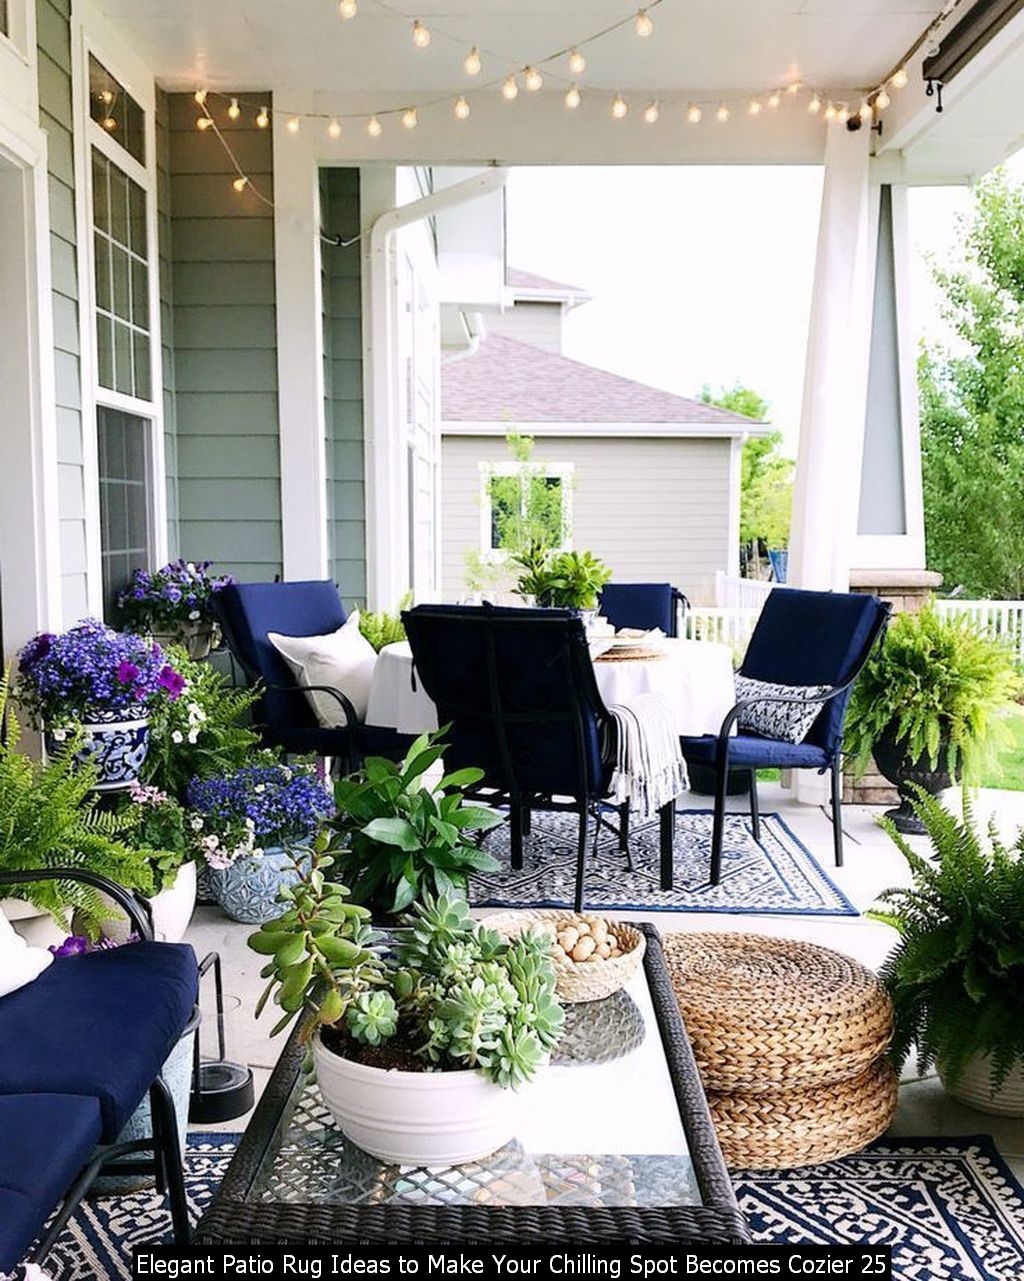 Elegant Patio Rug Ideas To Make Your Chilling Spot Becomes Cozier 25